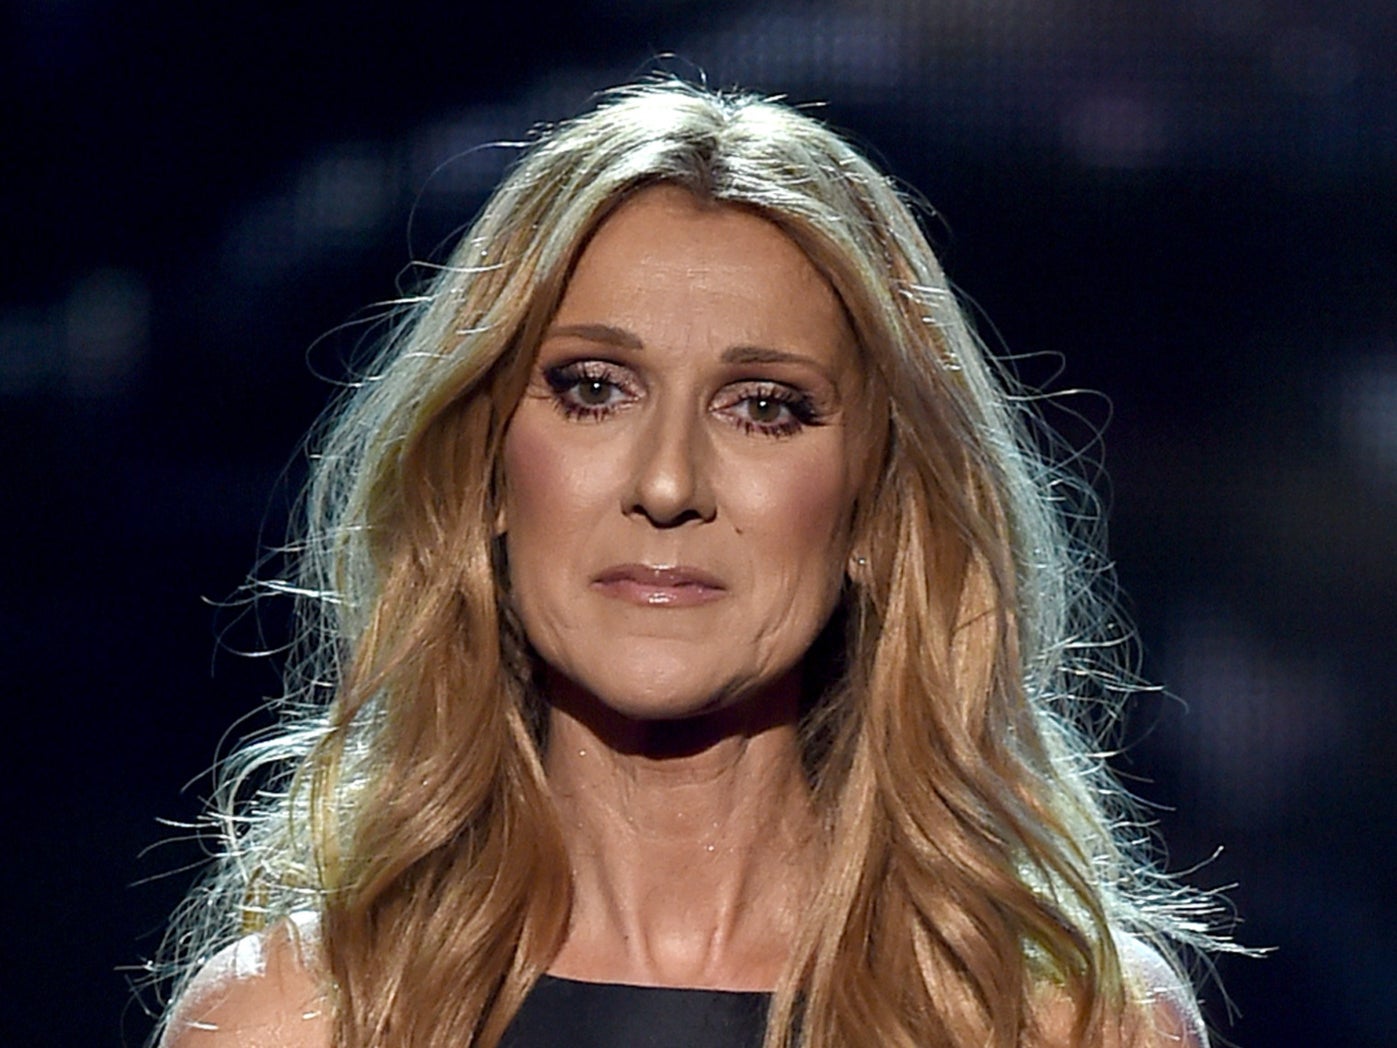 Celine Dion has cancelled her world tour